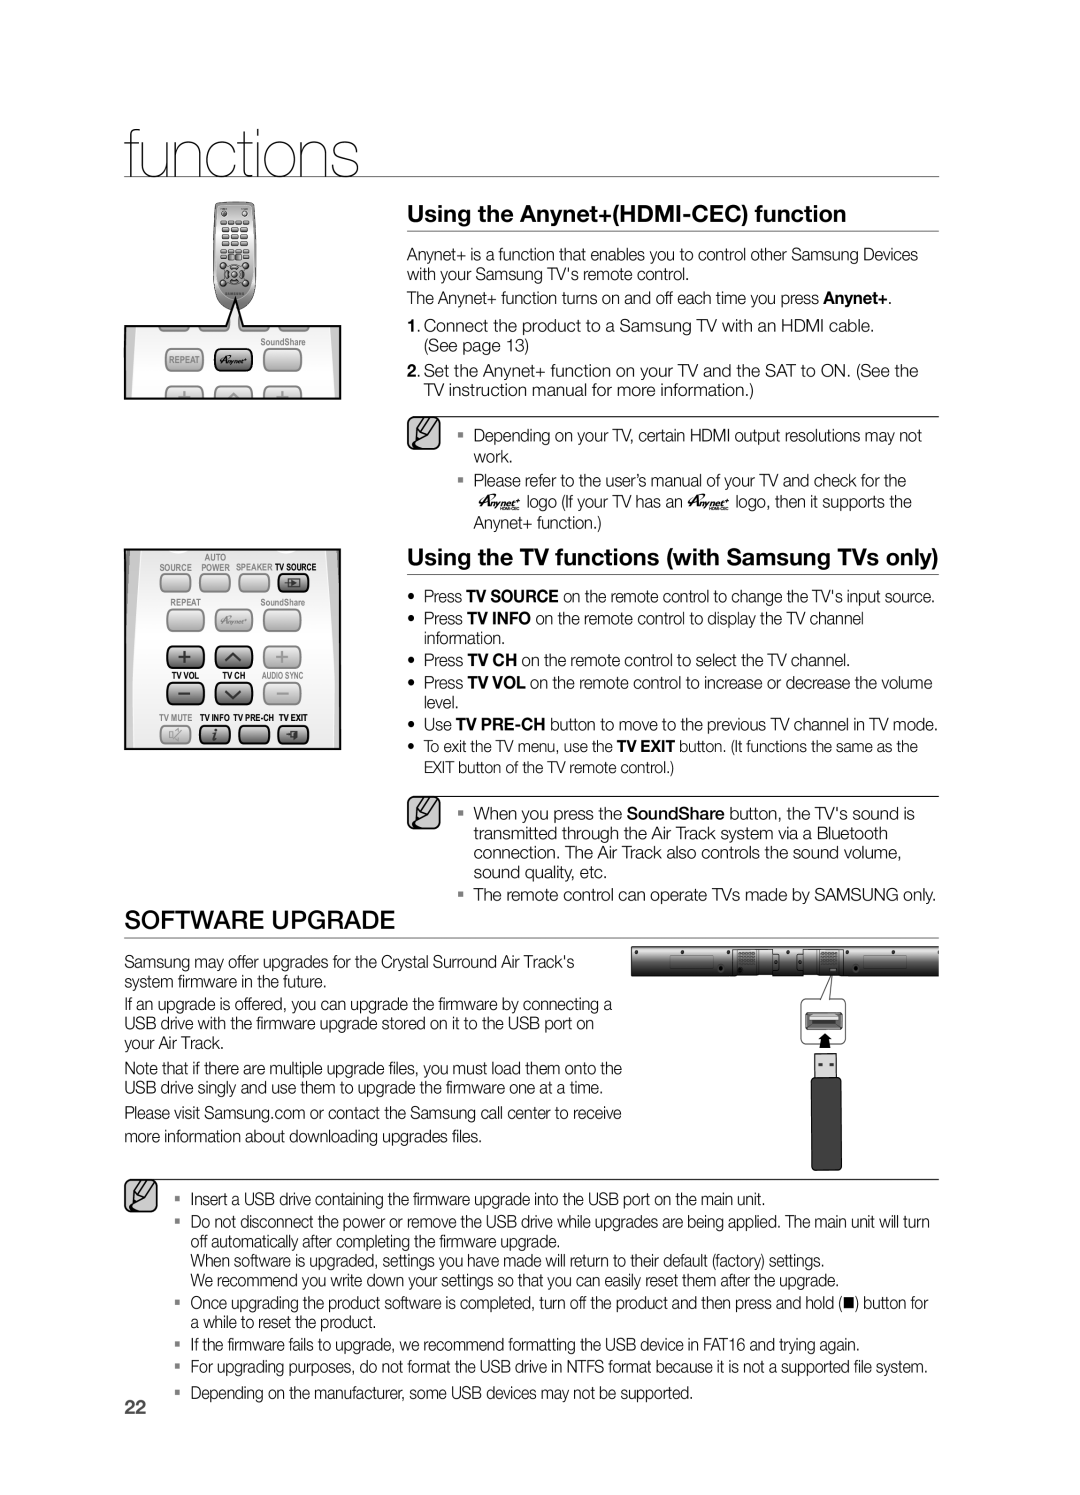 Samsung HW-FM55C user manual Software Upgrade, functions, Using the Anynet+HDMI-CECfunction 